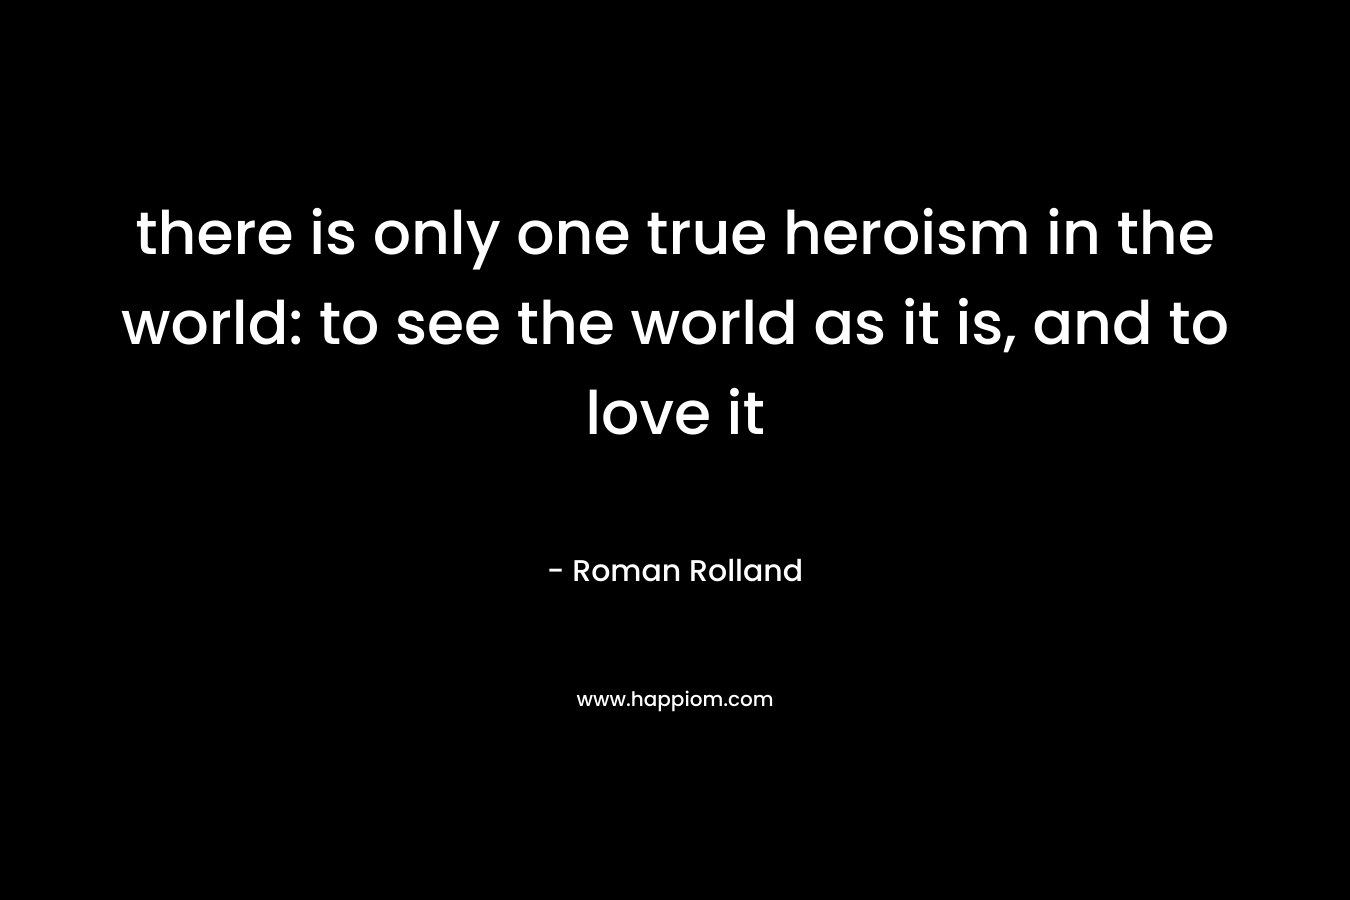 there is only one true heroism in the world: to see the world as it is, and to love it